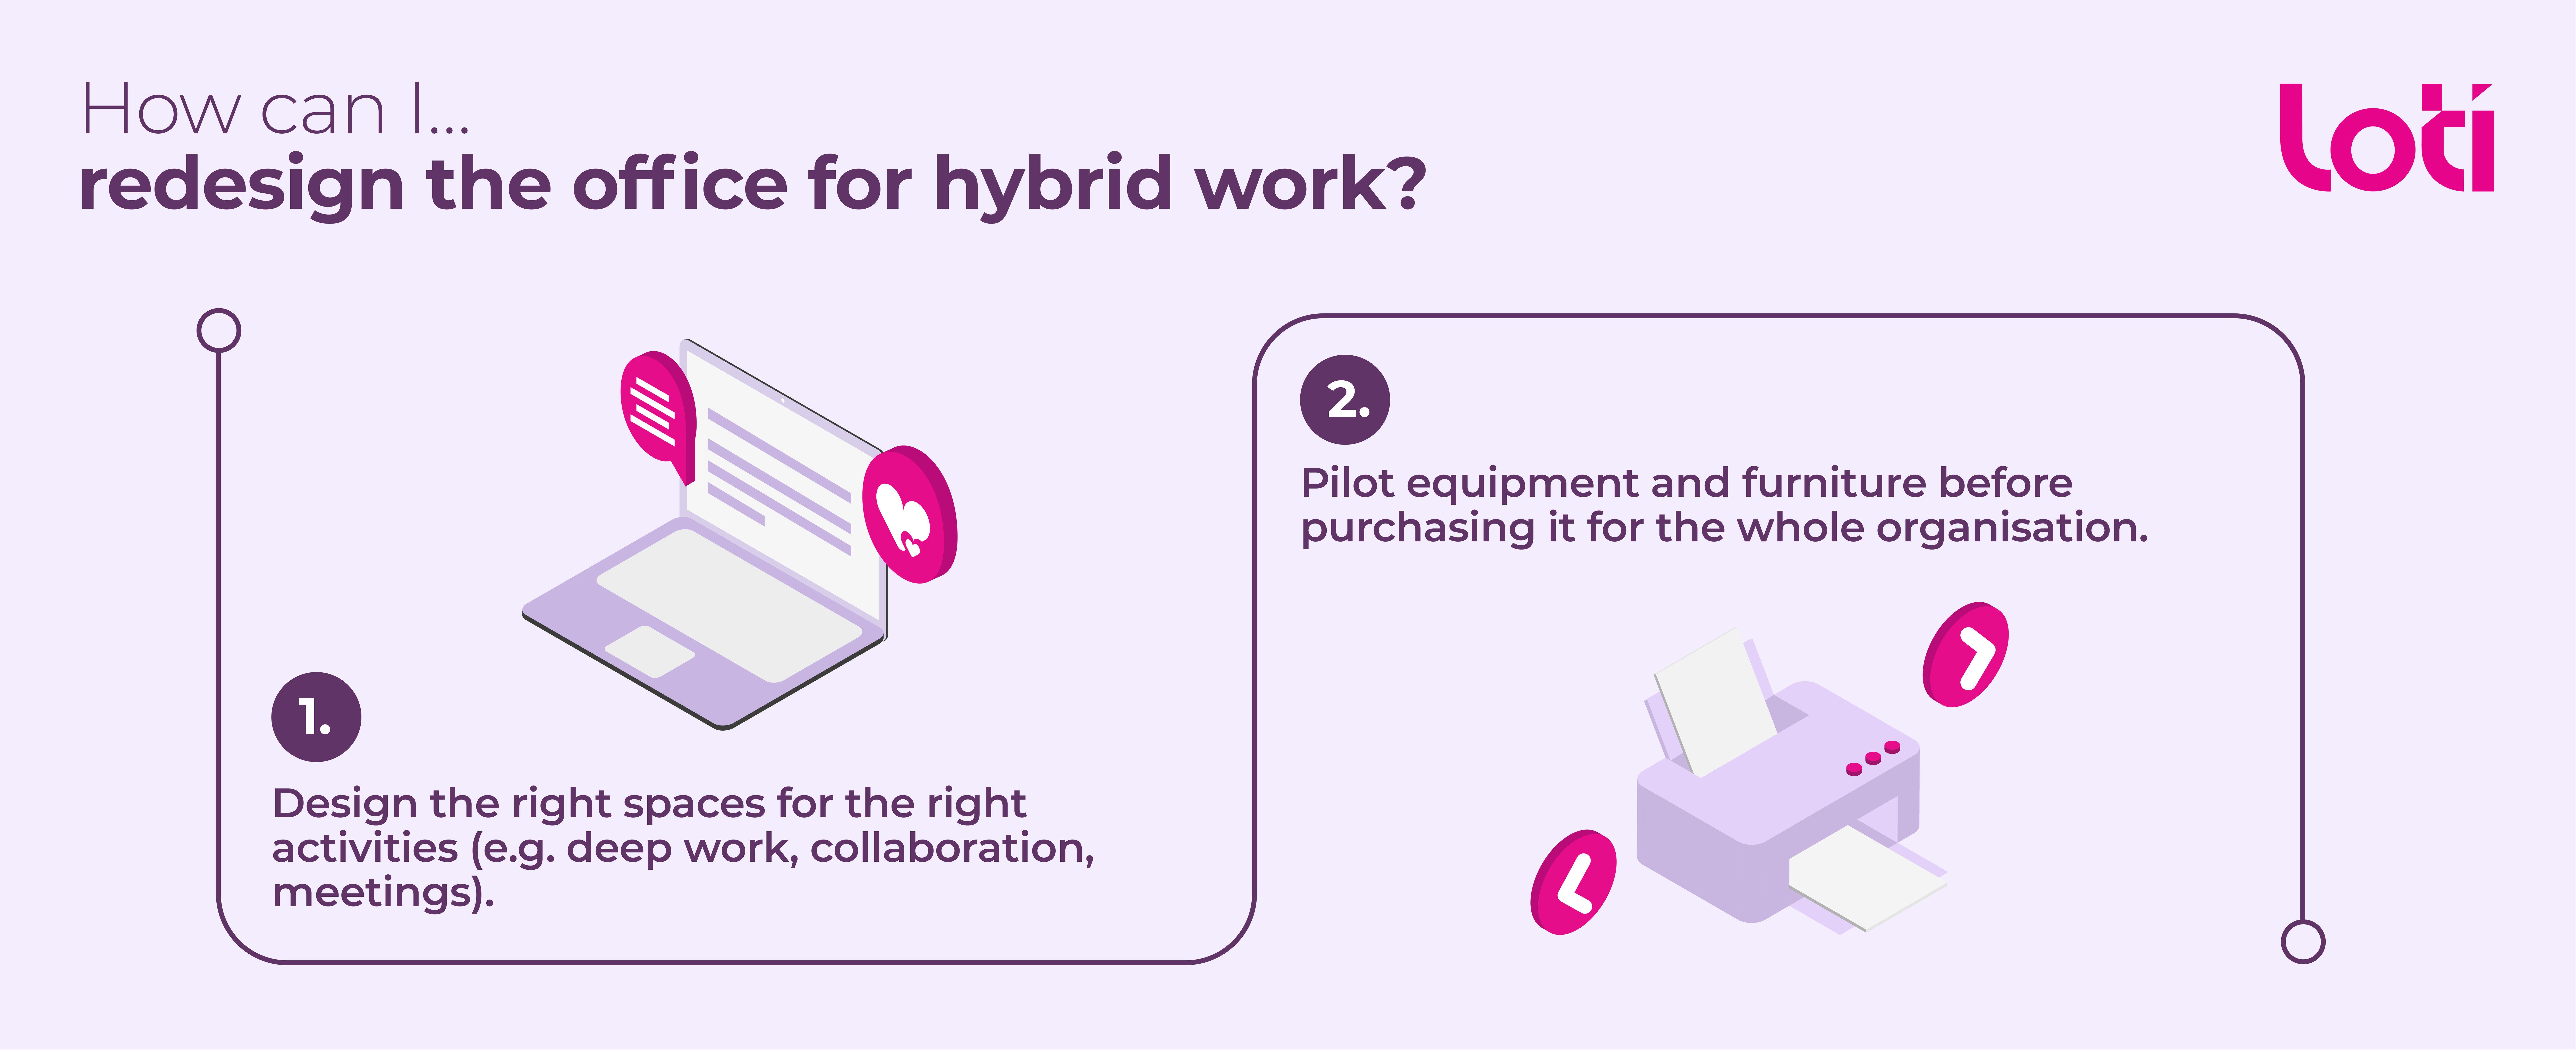 An infographic describing how can I redesign the office for hybrid work. The first way is design the right spaces for the right activities (e.g. deep work, collaboration, meetings). The second one is pilot equipment and furniture before purchasing it for the whole organisation.